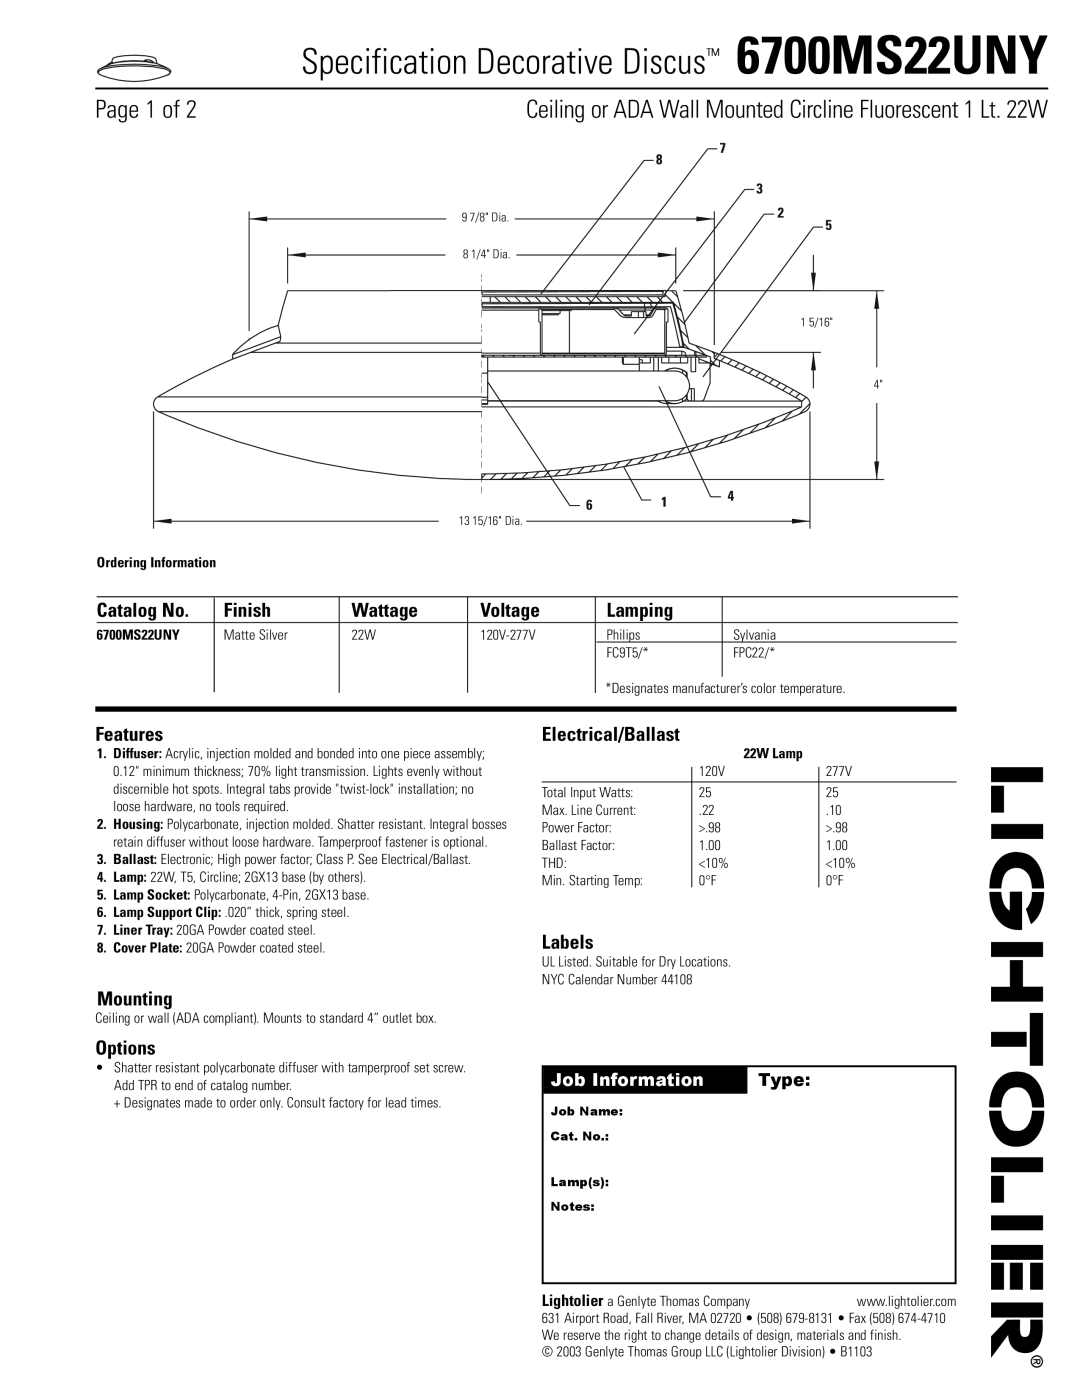 Lightolier manual Specification Decorative Discus 6700MS22UNY, Page 1 of, Catalog No, Finish, Wattage, Voltage, Lamping 